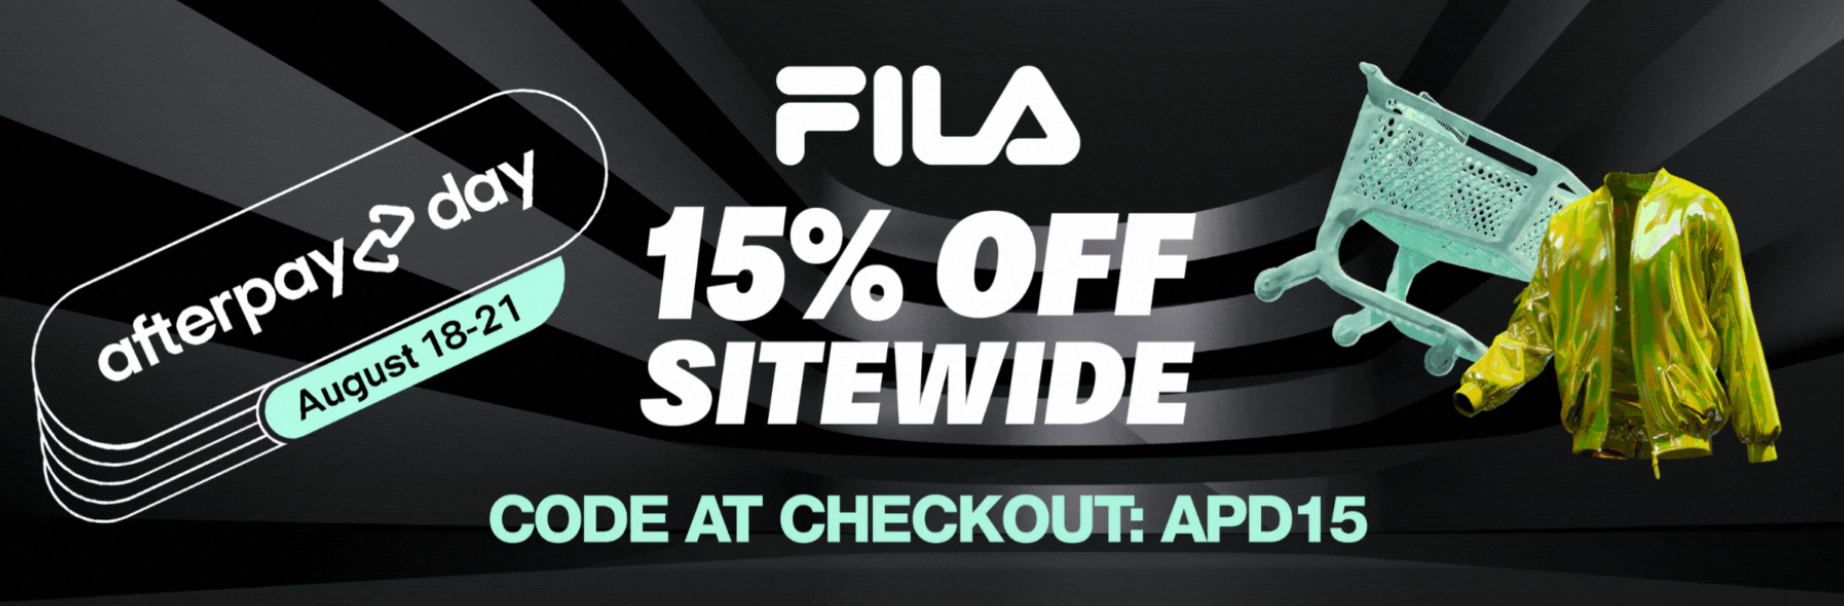 Extra 15% OFF sitewide with promo code at Fila